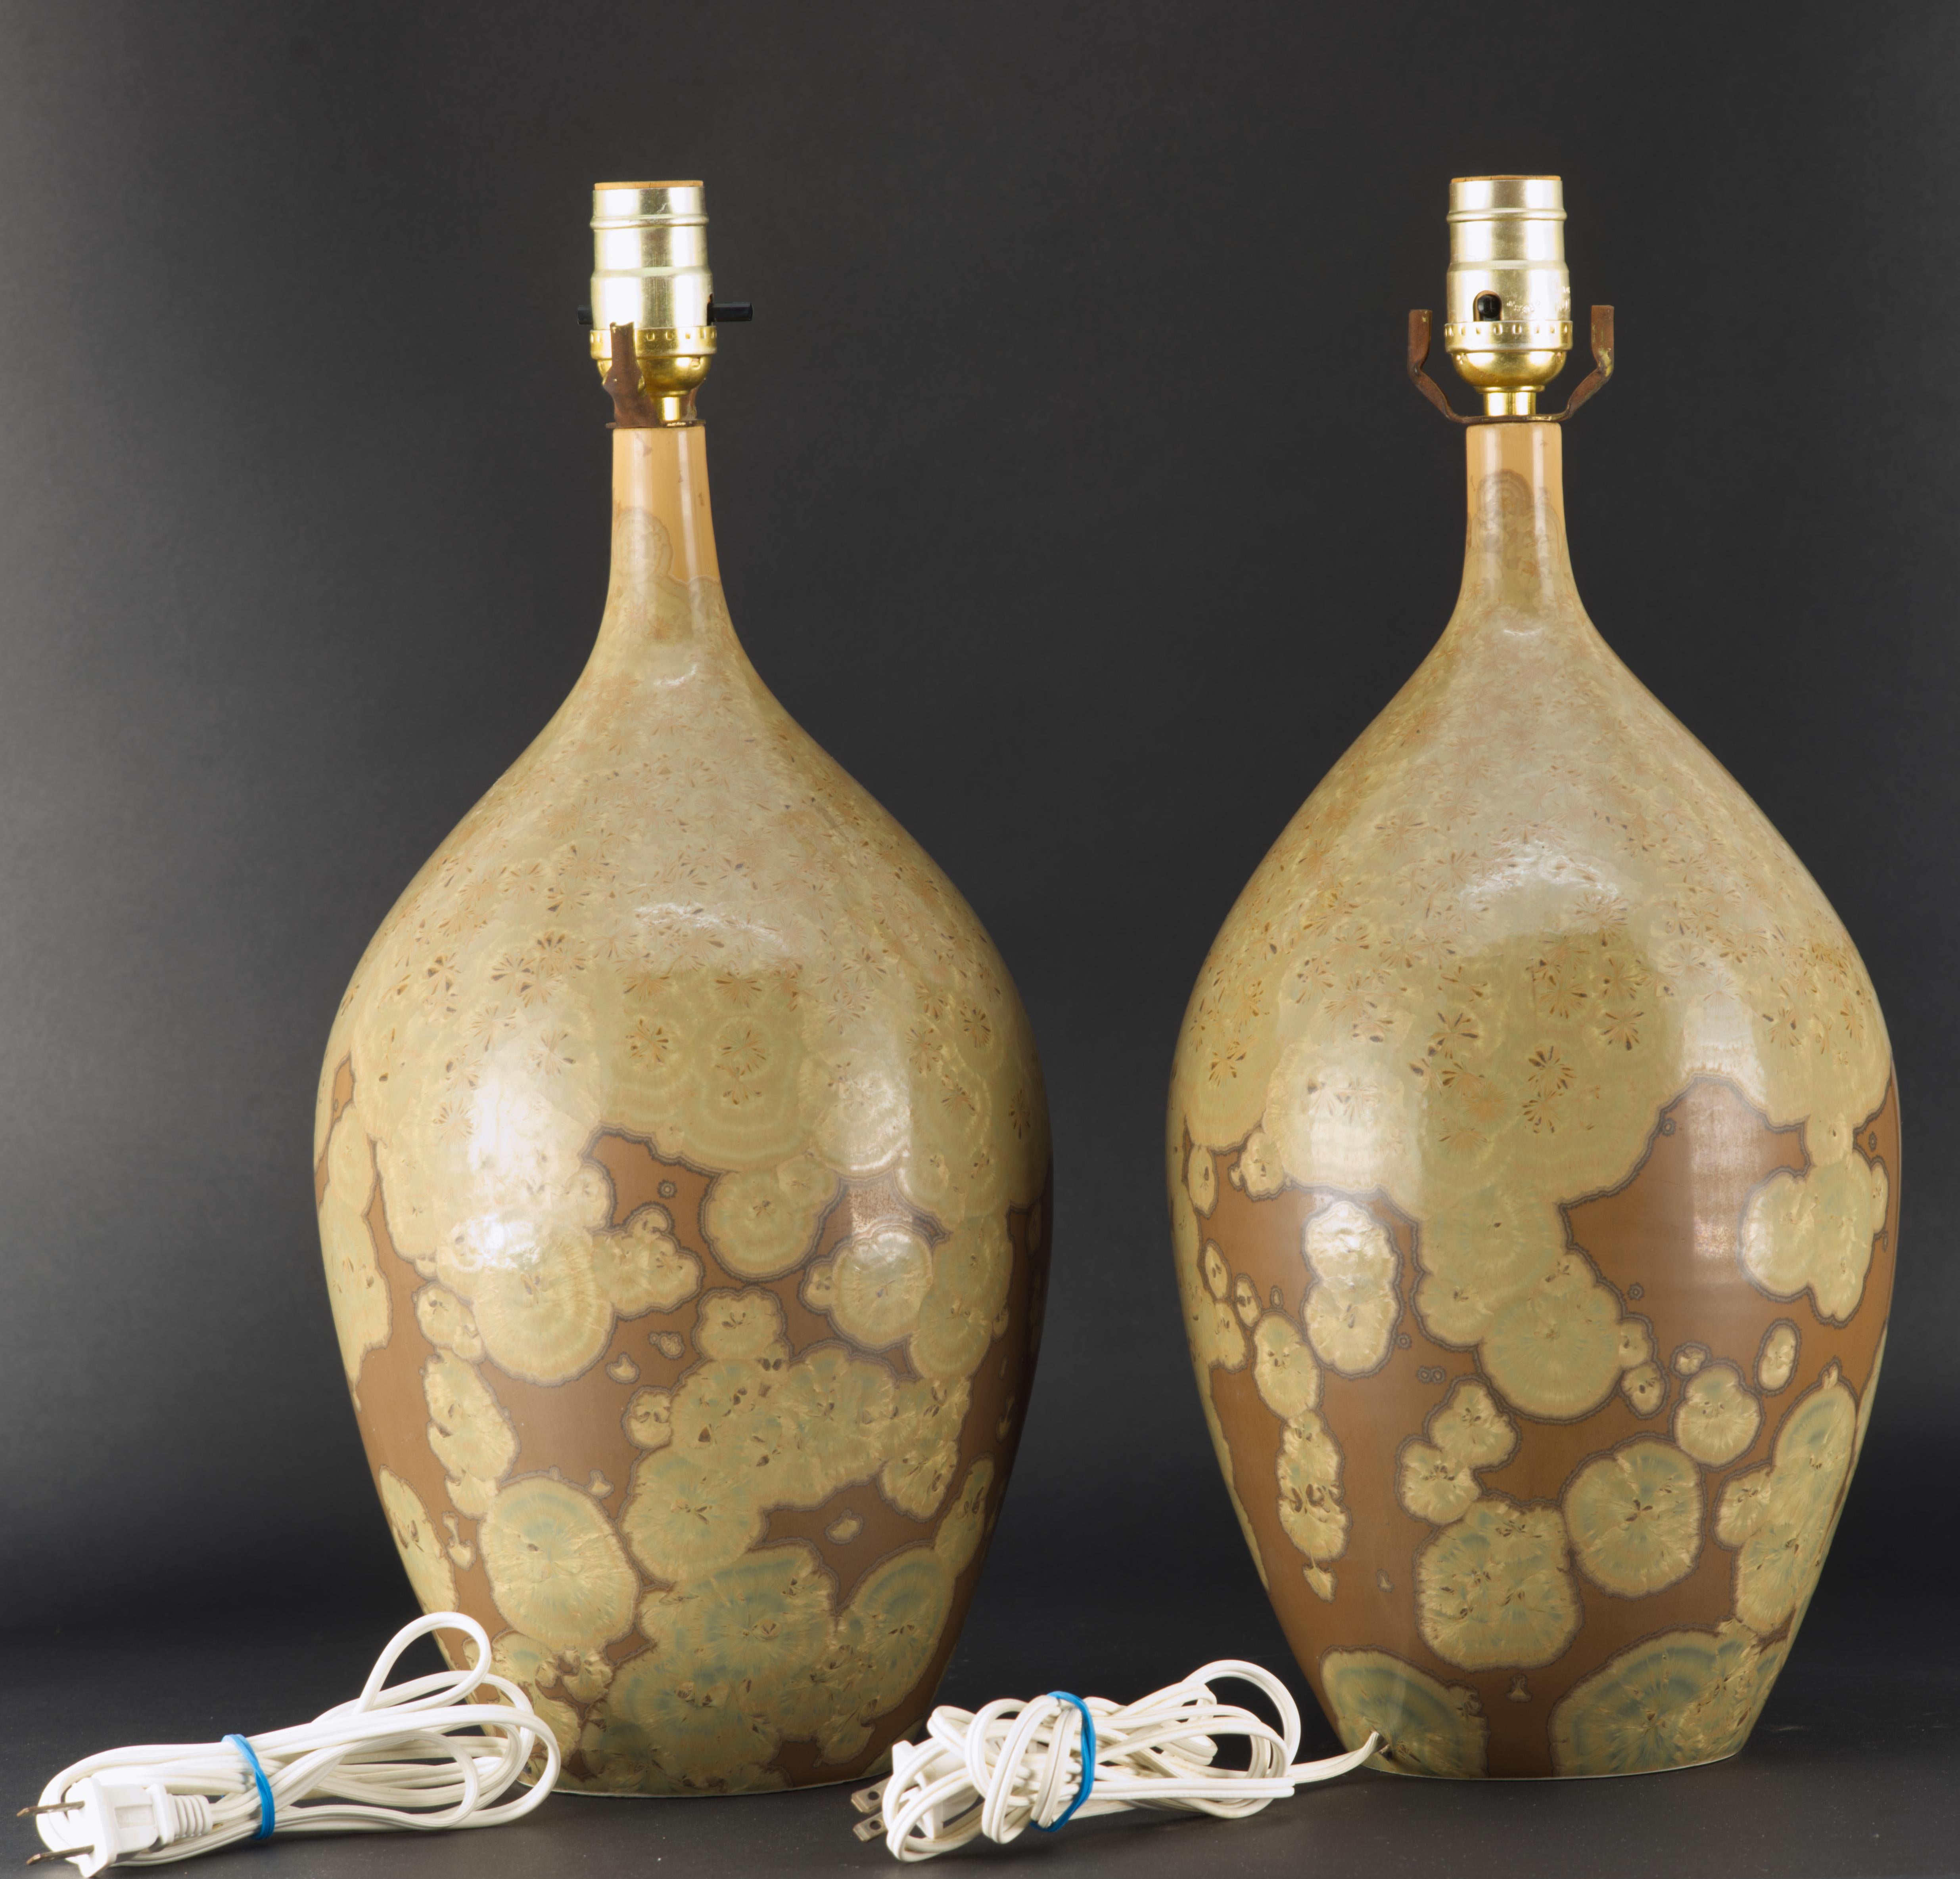 Hand-Crafted Pair of Organic Crystalline Glaze Hand Thrown Ceramic Lamps, American Studio  For Sale